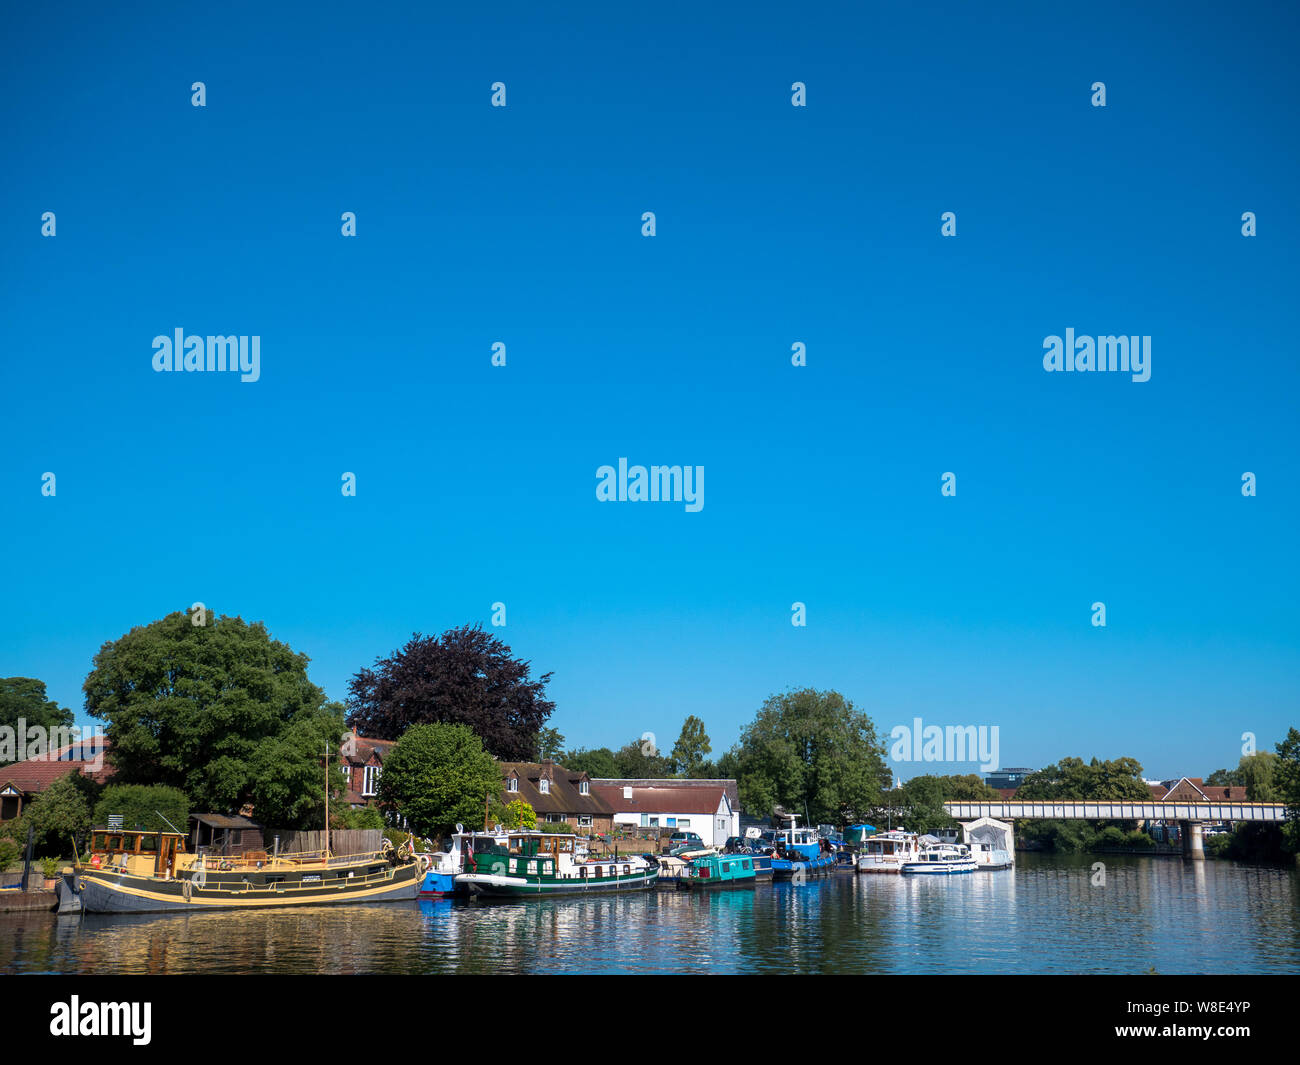 Pont ferroviaire de Staines, Tamise, Staines-upon-Thames, Surrey, England, UK, FR. Banque D'Images